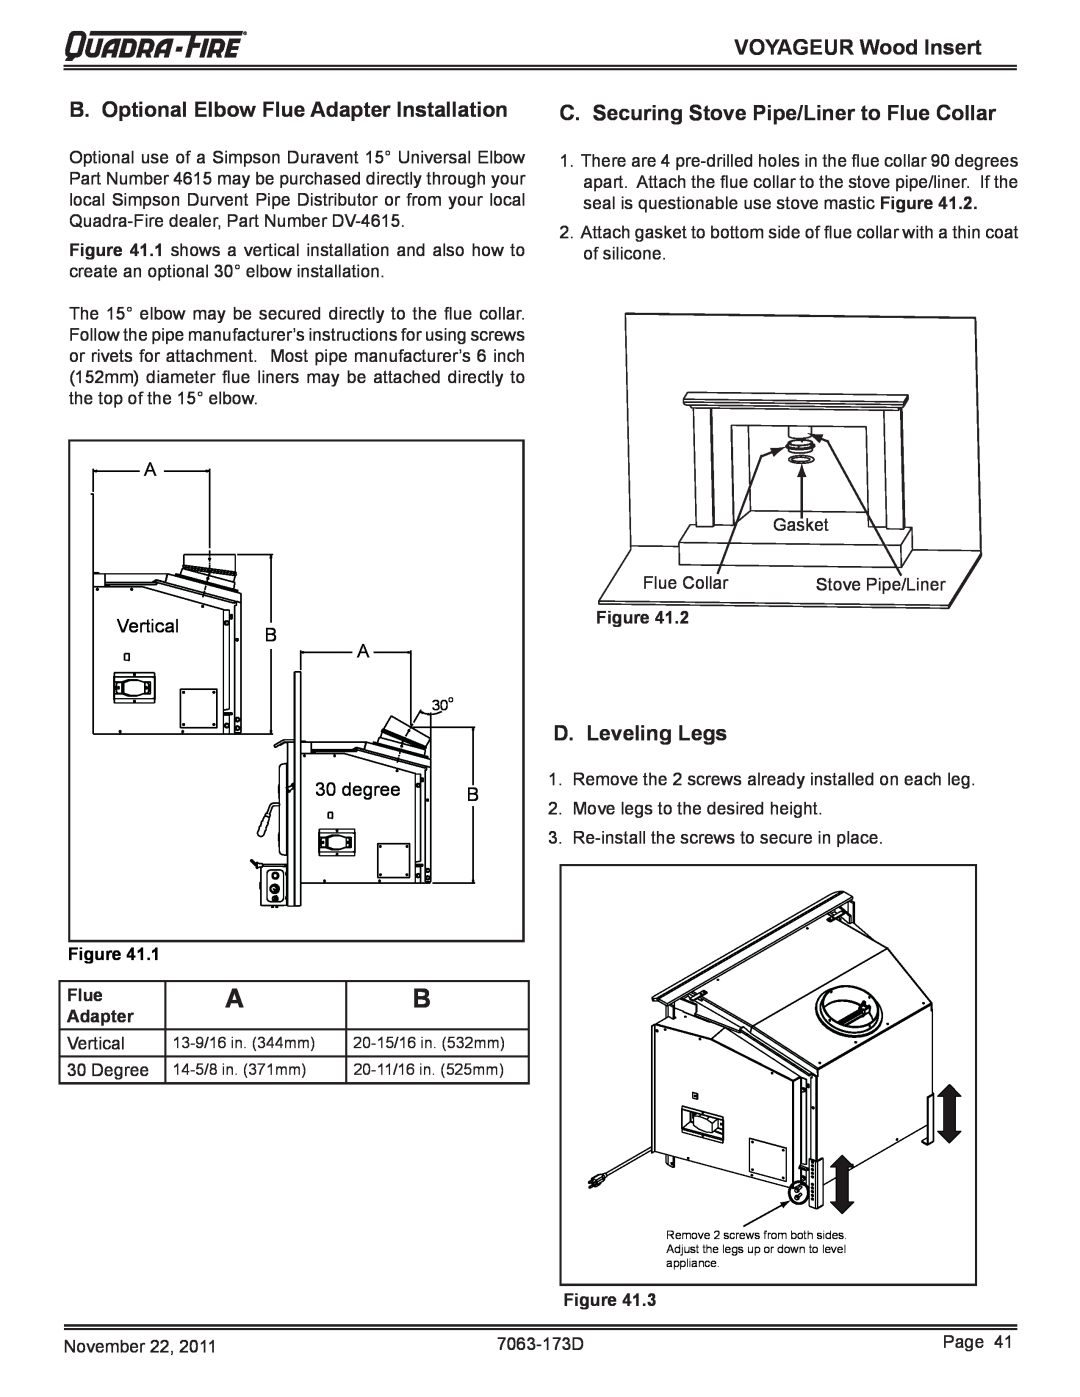 Quadra-Fire VOYAGEUR-MBK B. Optional Elbow Flue Adapter Installation, C. Securing Stove Pipe/Liner to Flue Collar, Figure 